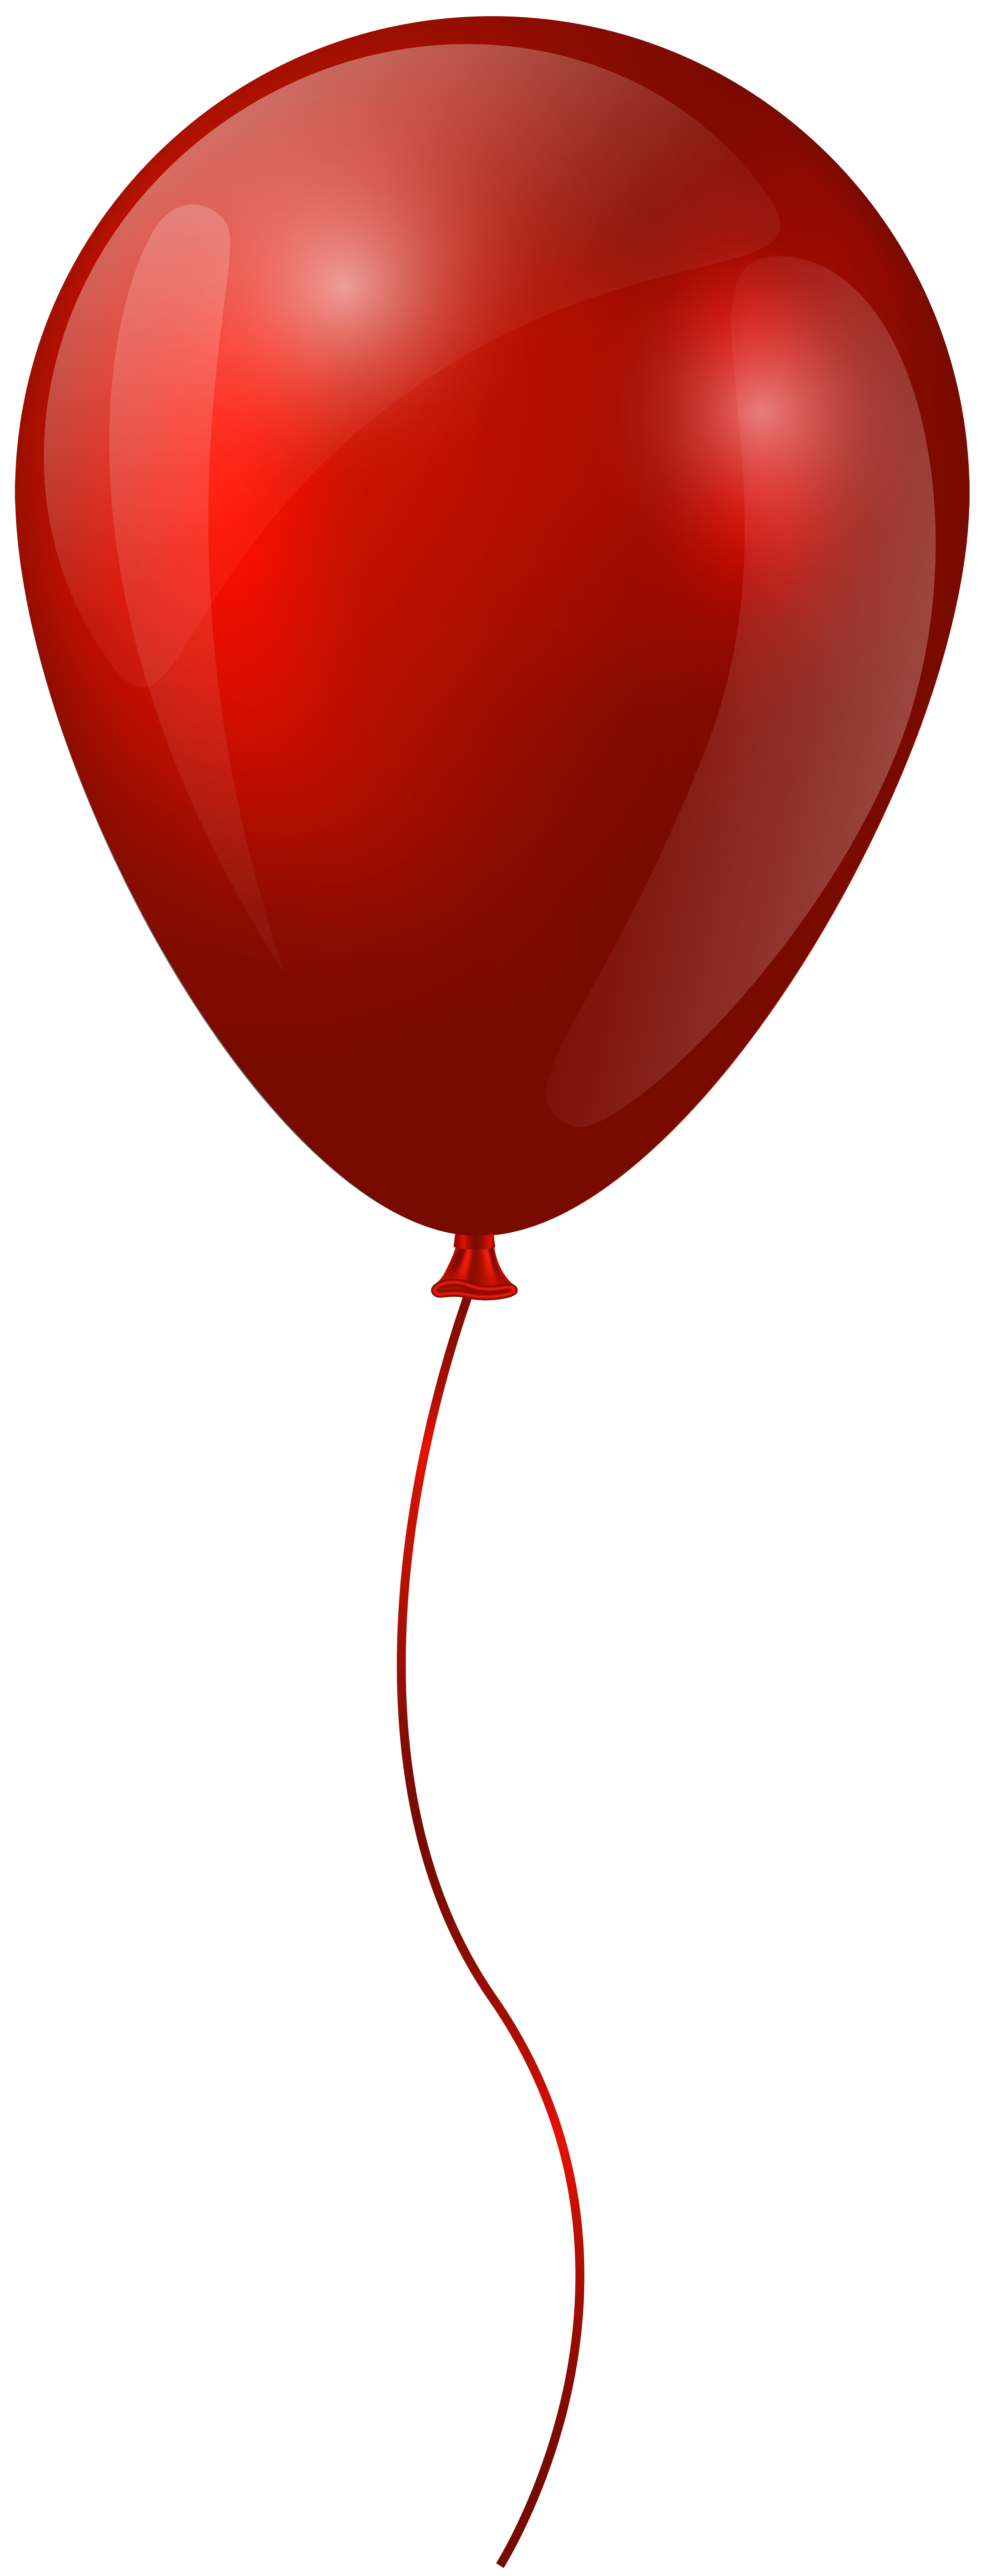 Red Balloon Transparent Clip Art | Gallery Yopriceville - High-Quality ...